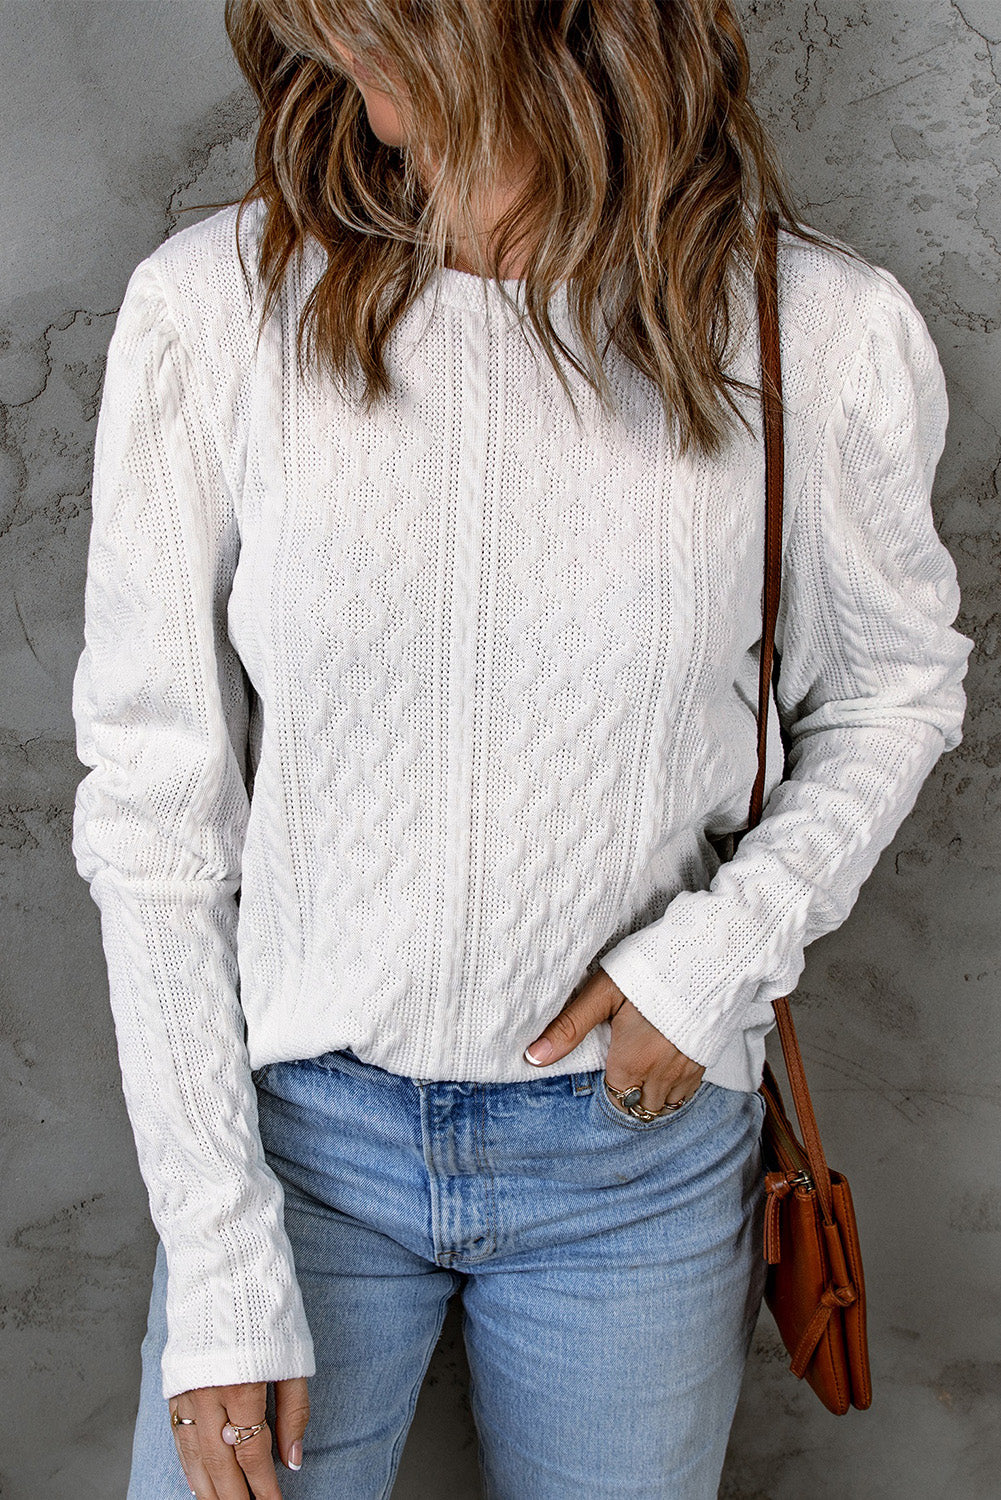 White Solid Color Puffy Sleeve Textured Knit Top White 95%Polyester+5%Elastane Long Sleeve Tops JT's Designer Fashion